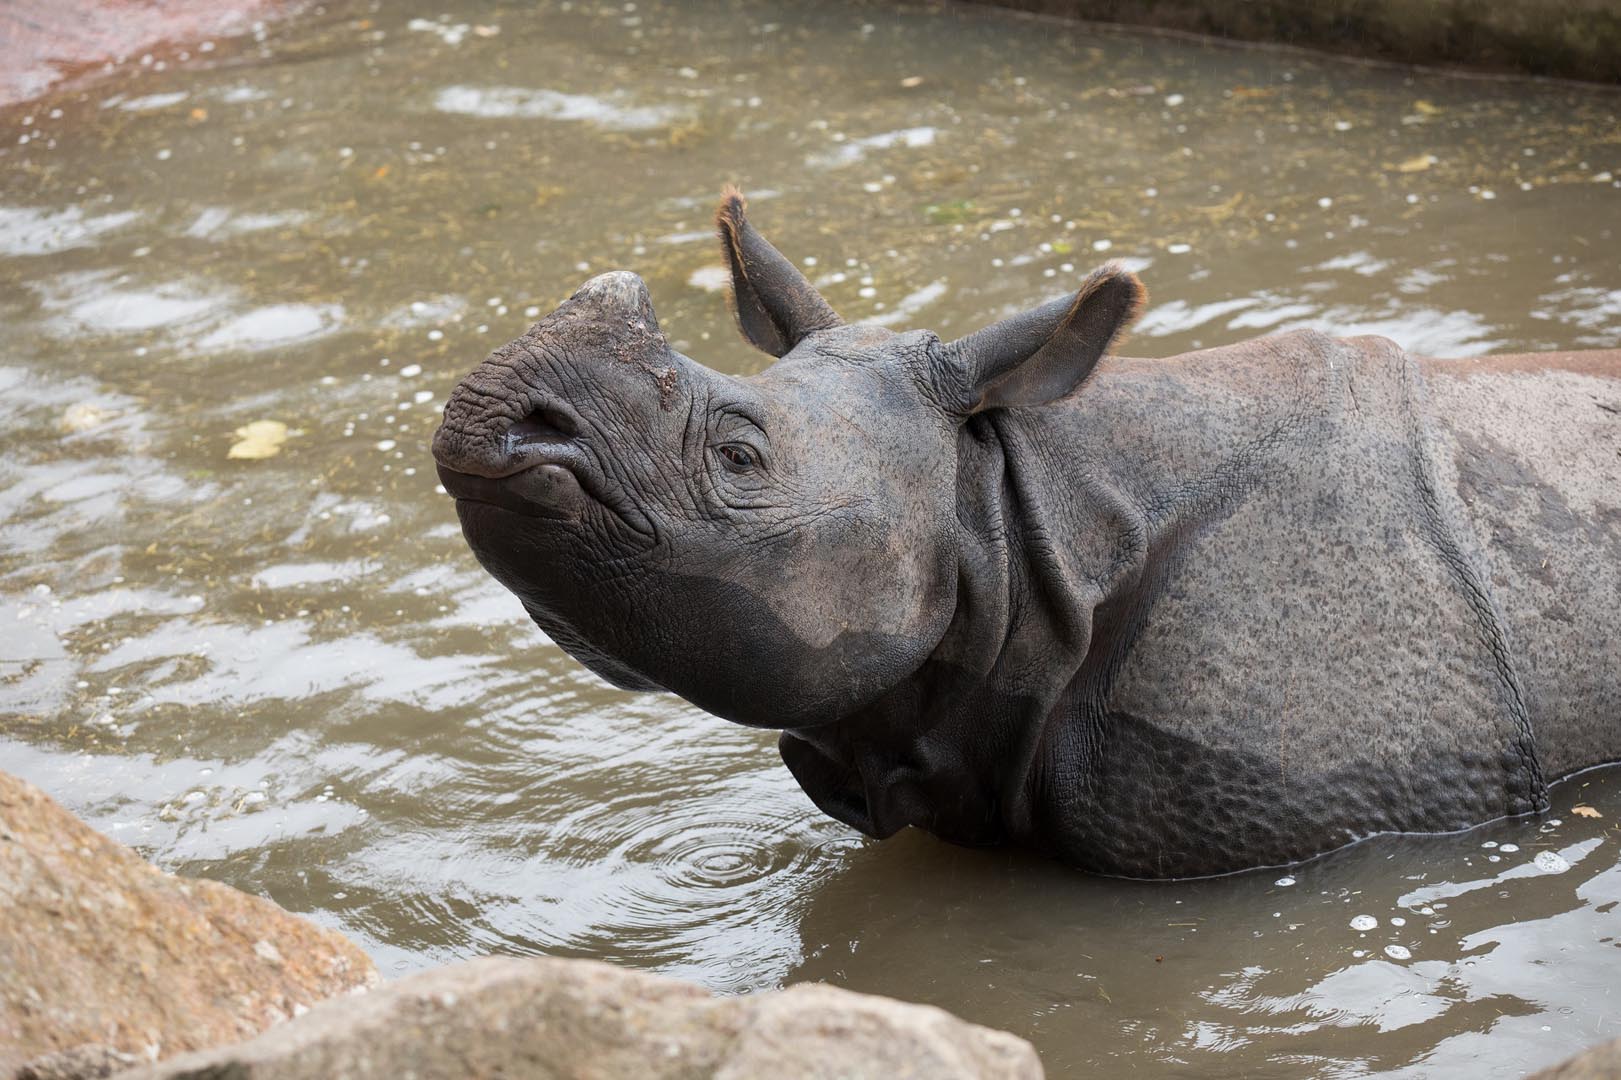 Greater one horned rhinoceros sitting in pool facing left and looking up